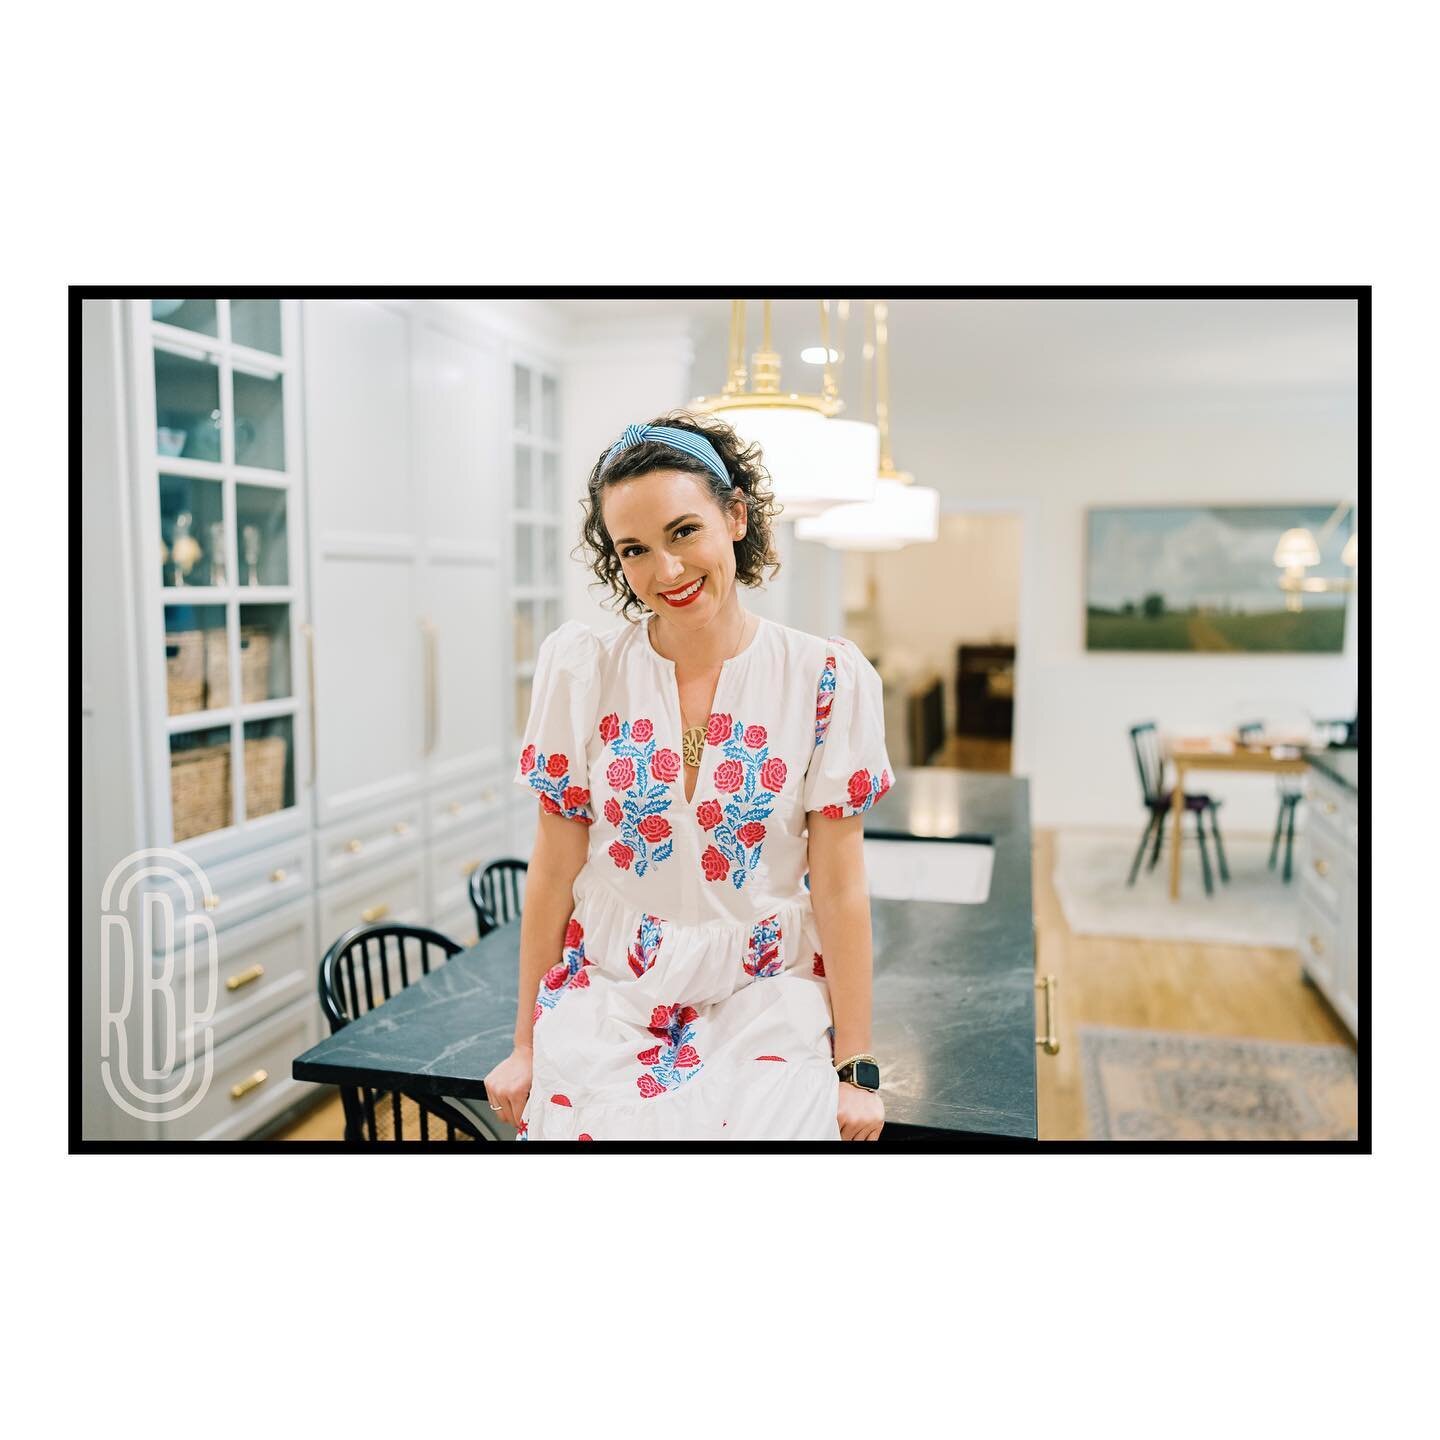 A test portrait yesterday of @ktstil in our newly renovated kitchen ✨ She drove the creative vision for the design and layout, and finished out the room with beautifully updated fixtures and decor. In love with this space ❤️ @bloodworth_hospitality 
